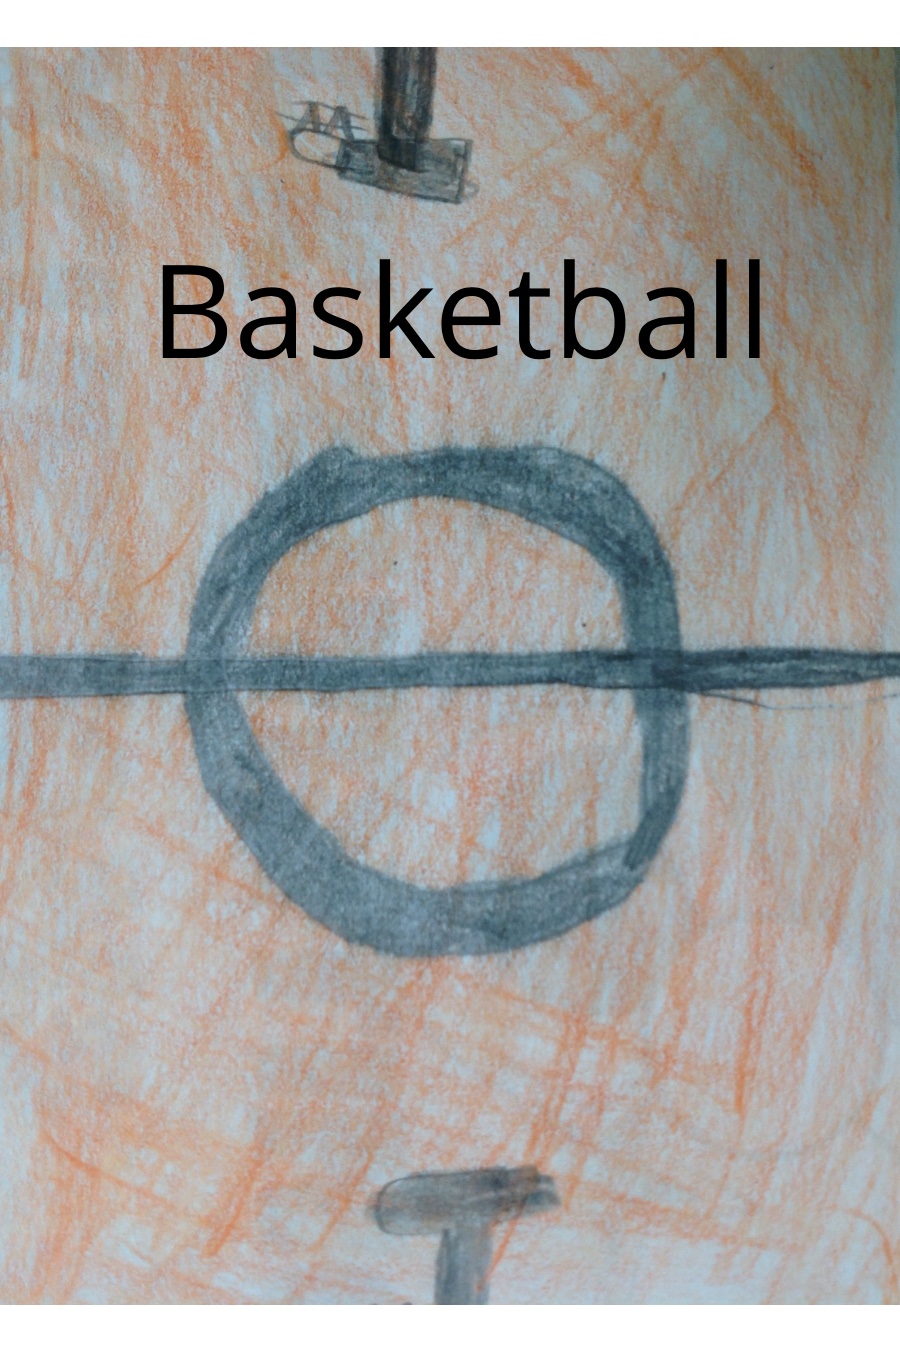 Basketball by Connor S